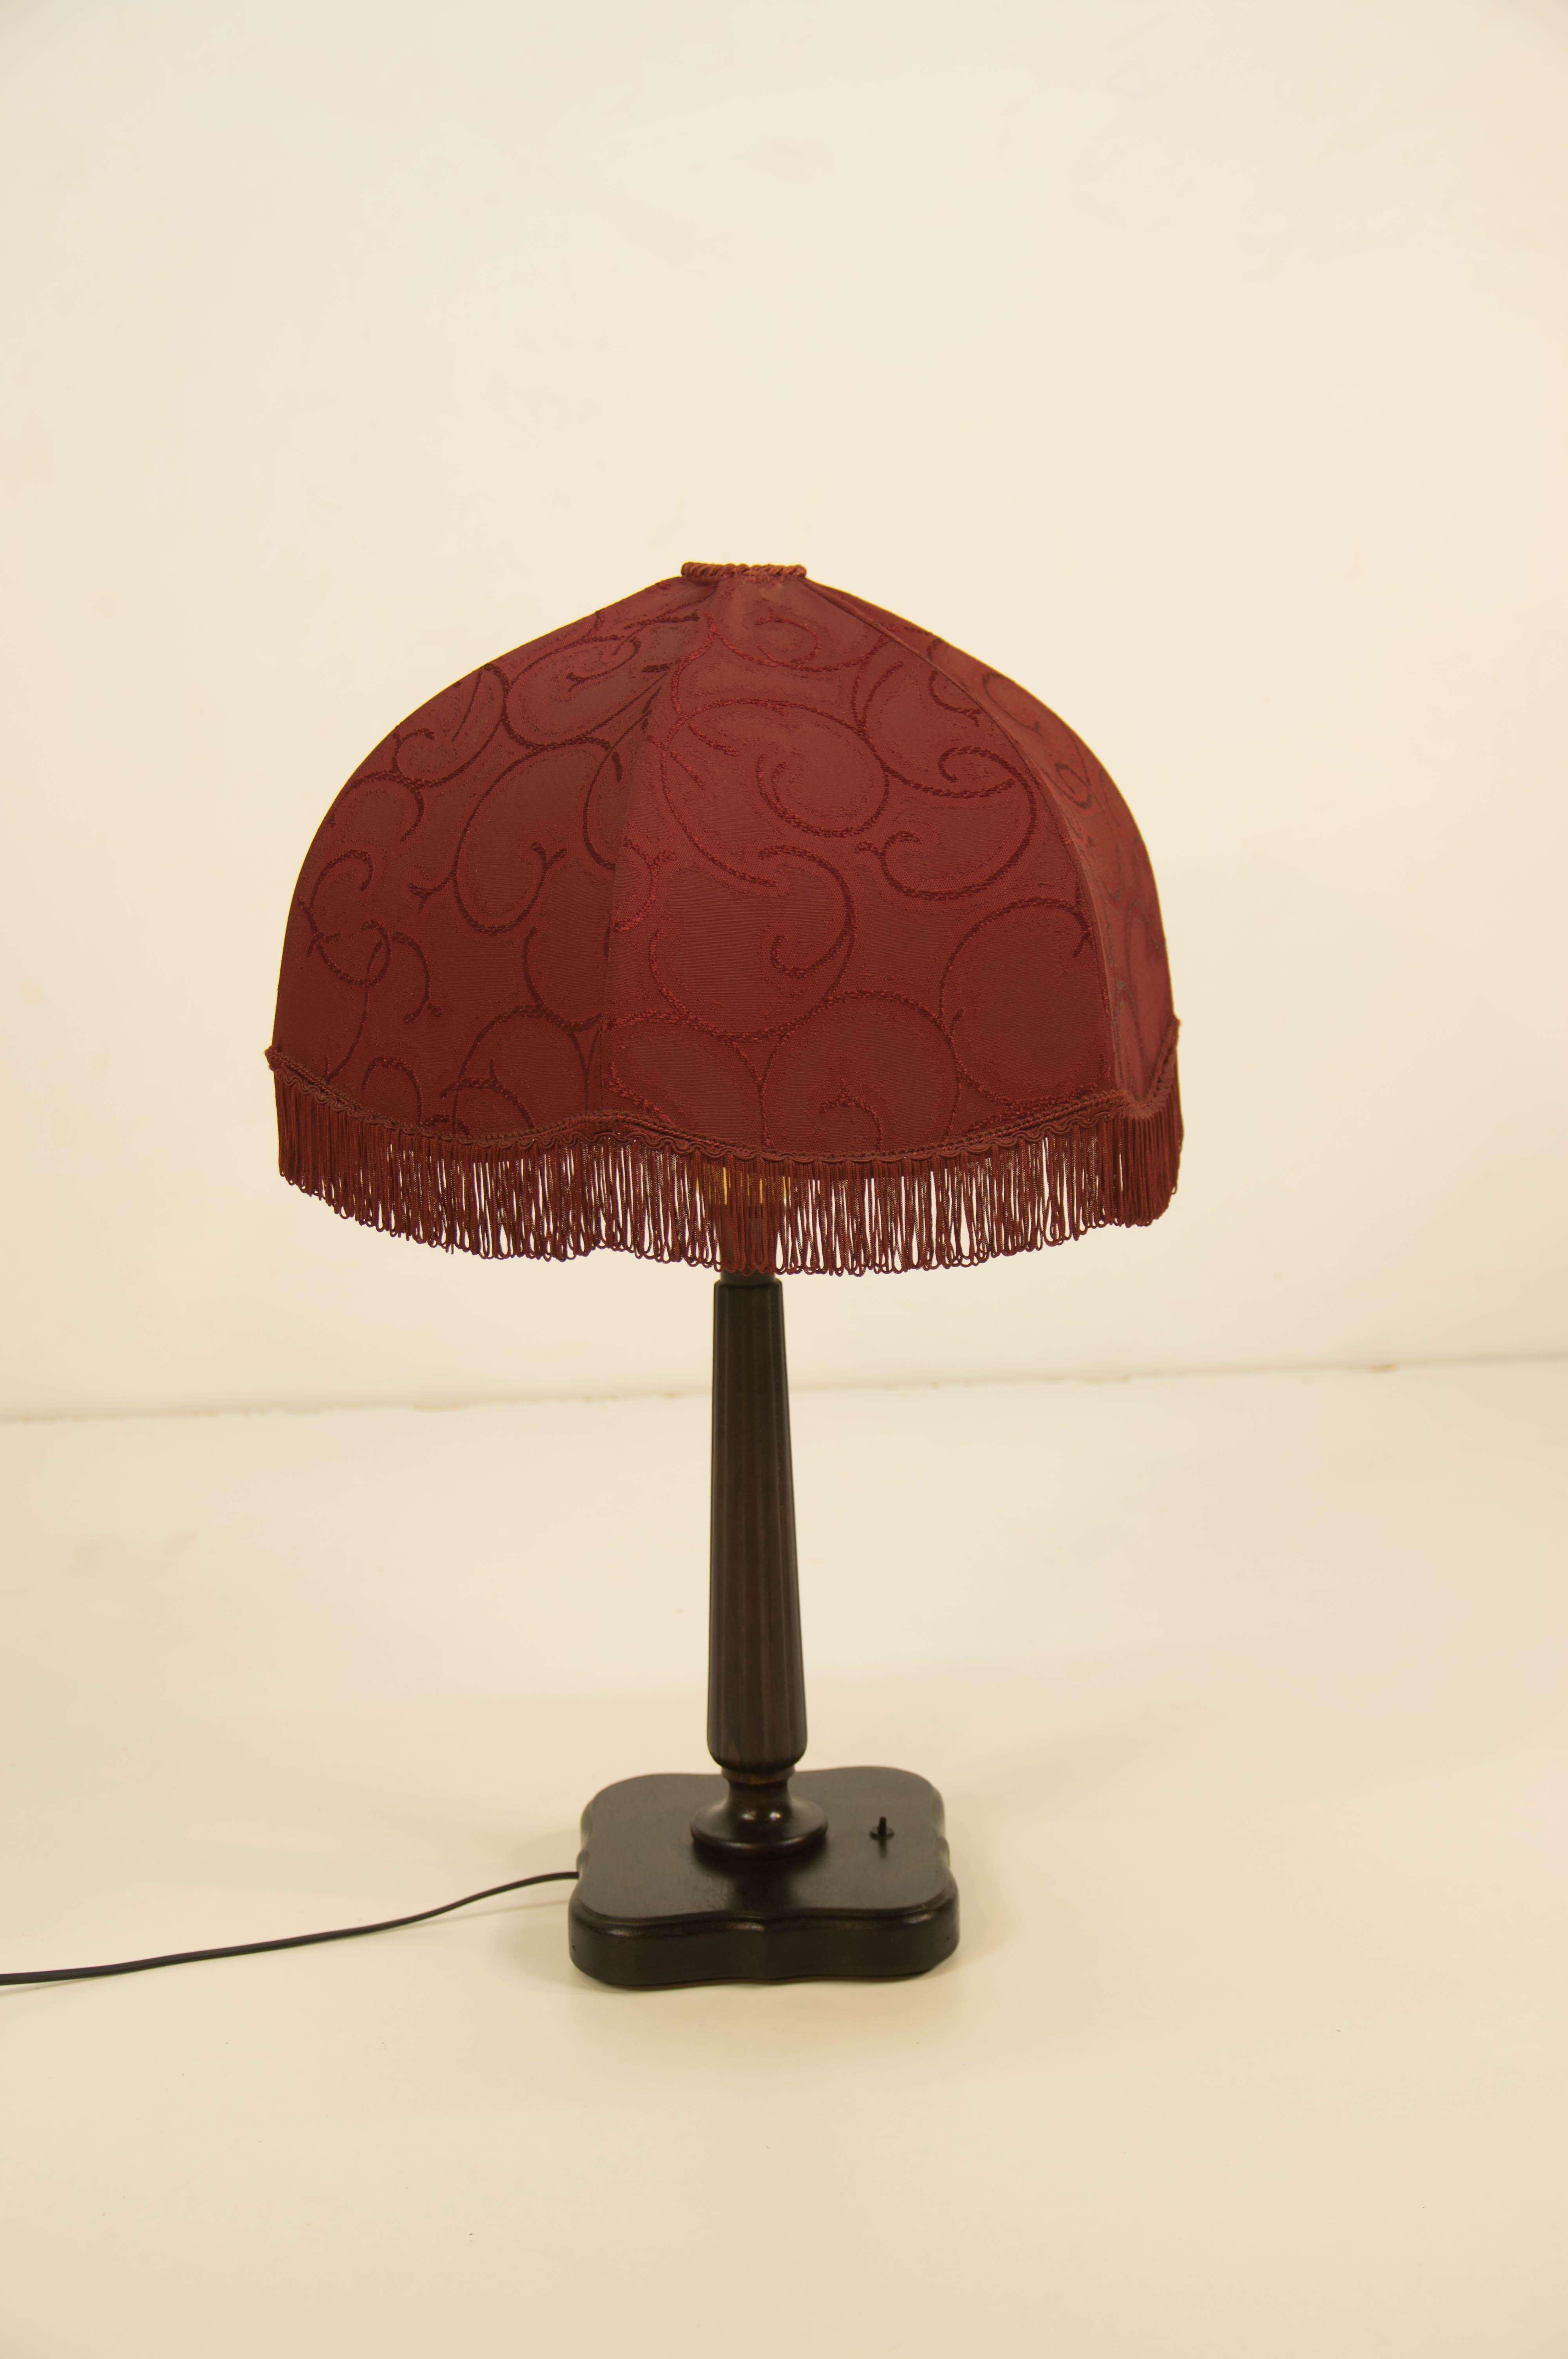 Wood table lamp with fabric shade. Max 60w, E27 or E26 bulb.
Original very good condition.